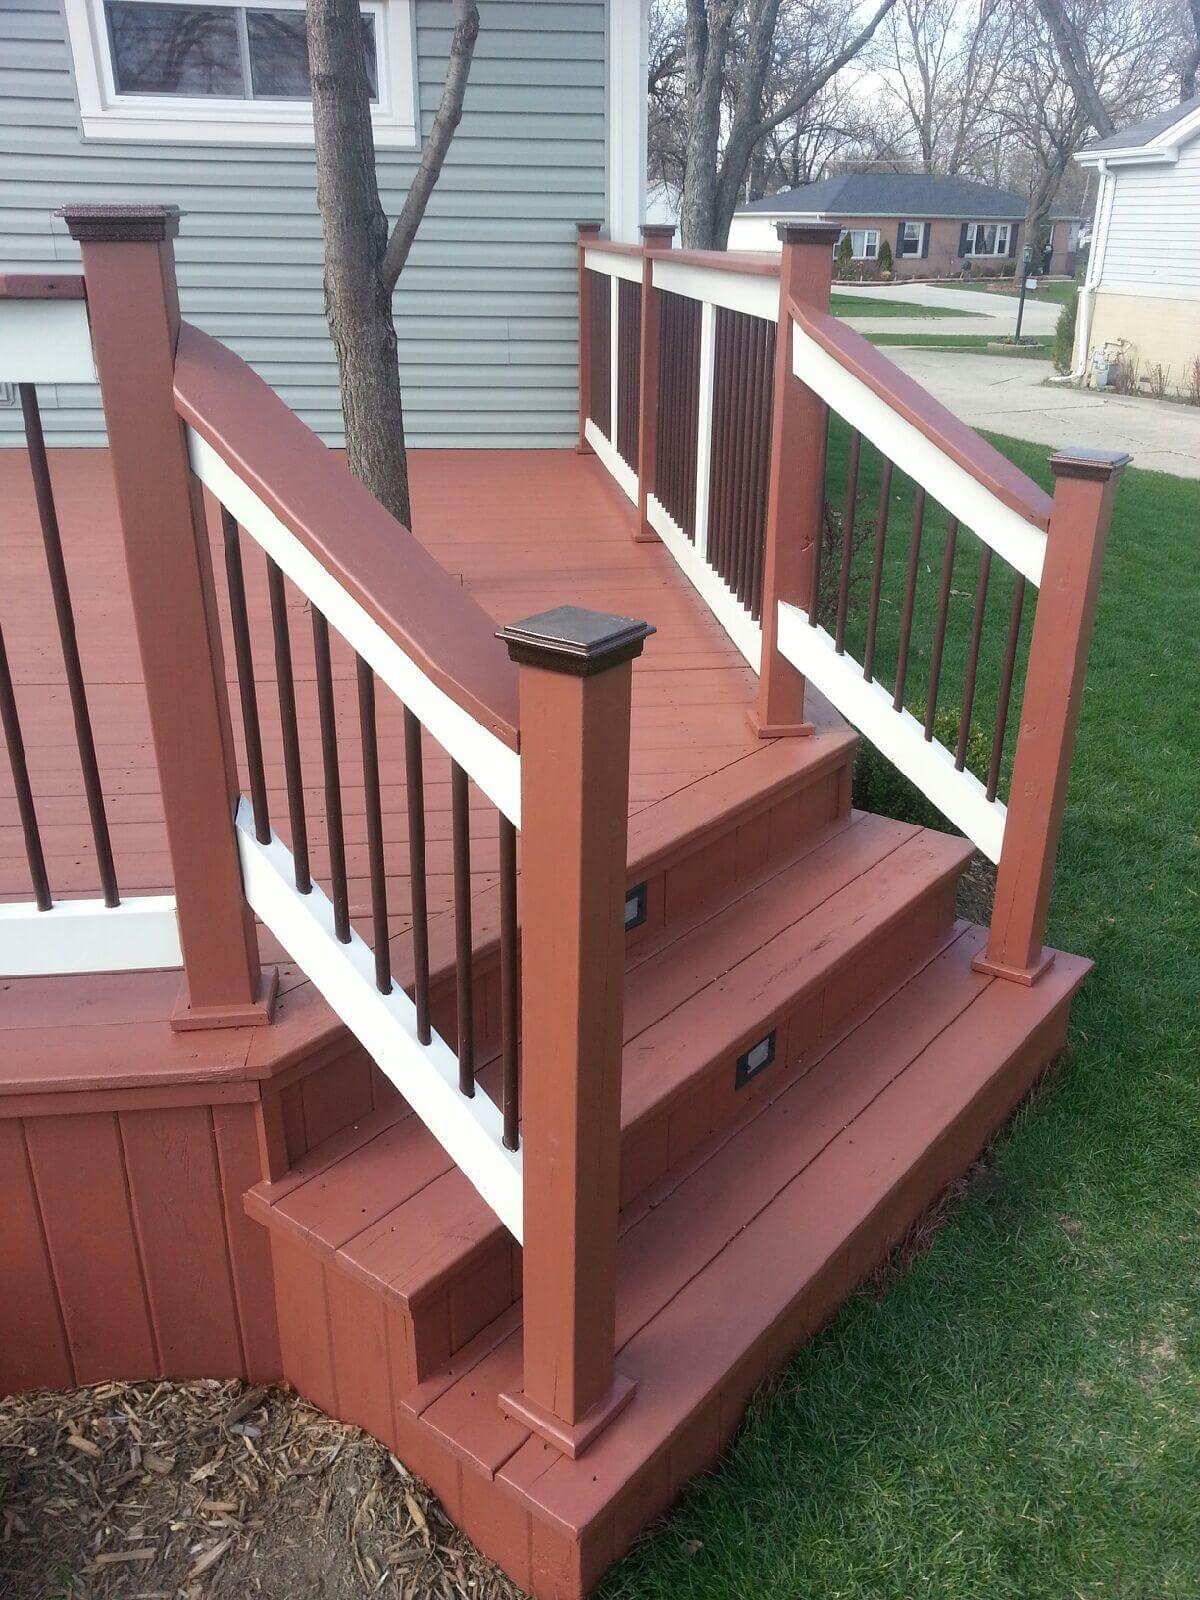 Repairs and maintenance for your deck, fence, and exterior wood staining. - Deck Staining Saint Charles - Deck Cleaning Services